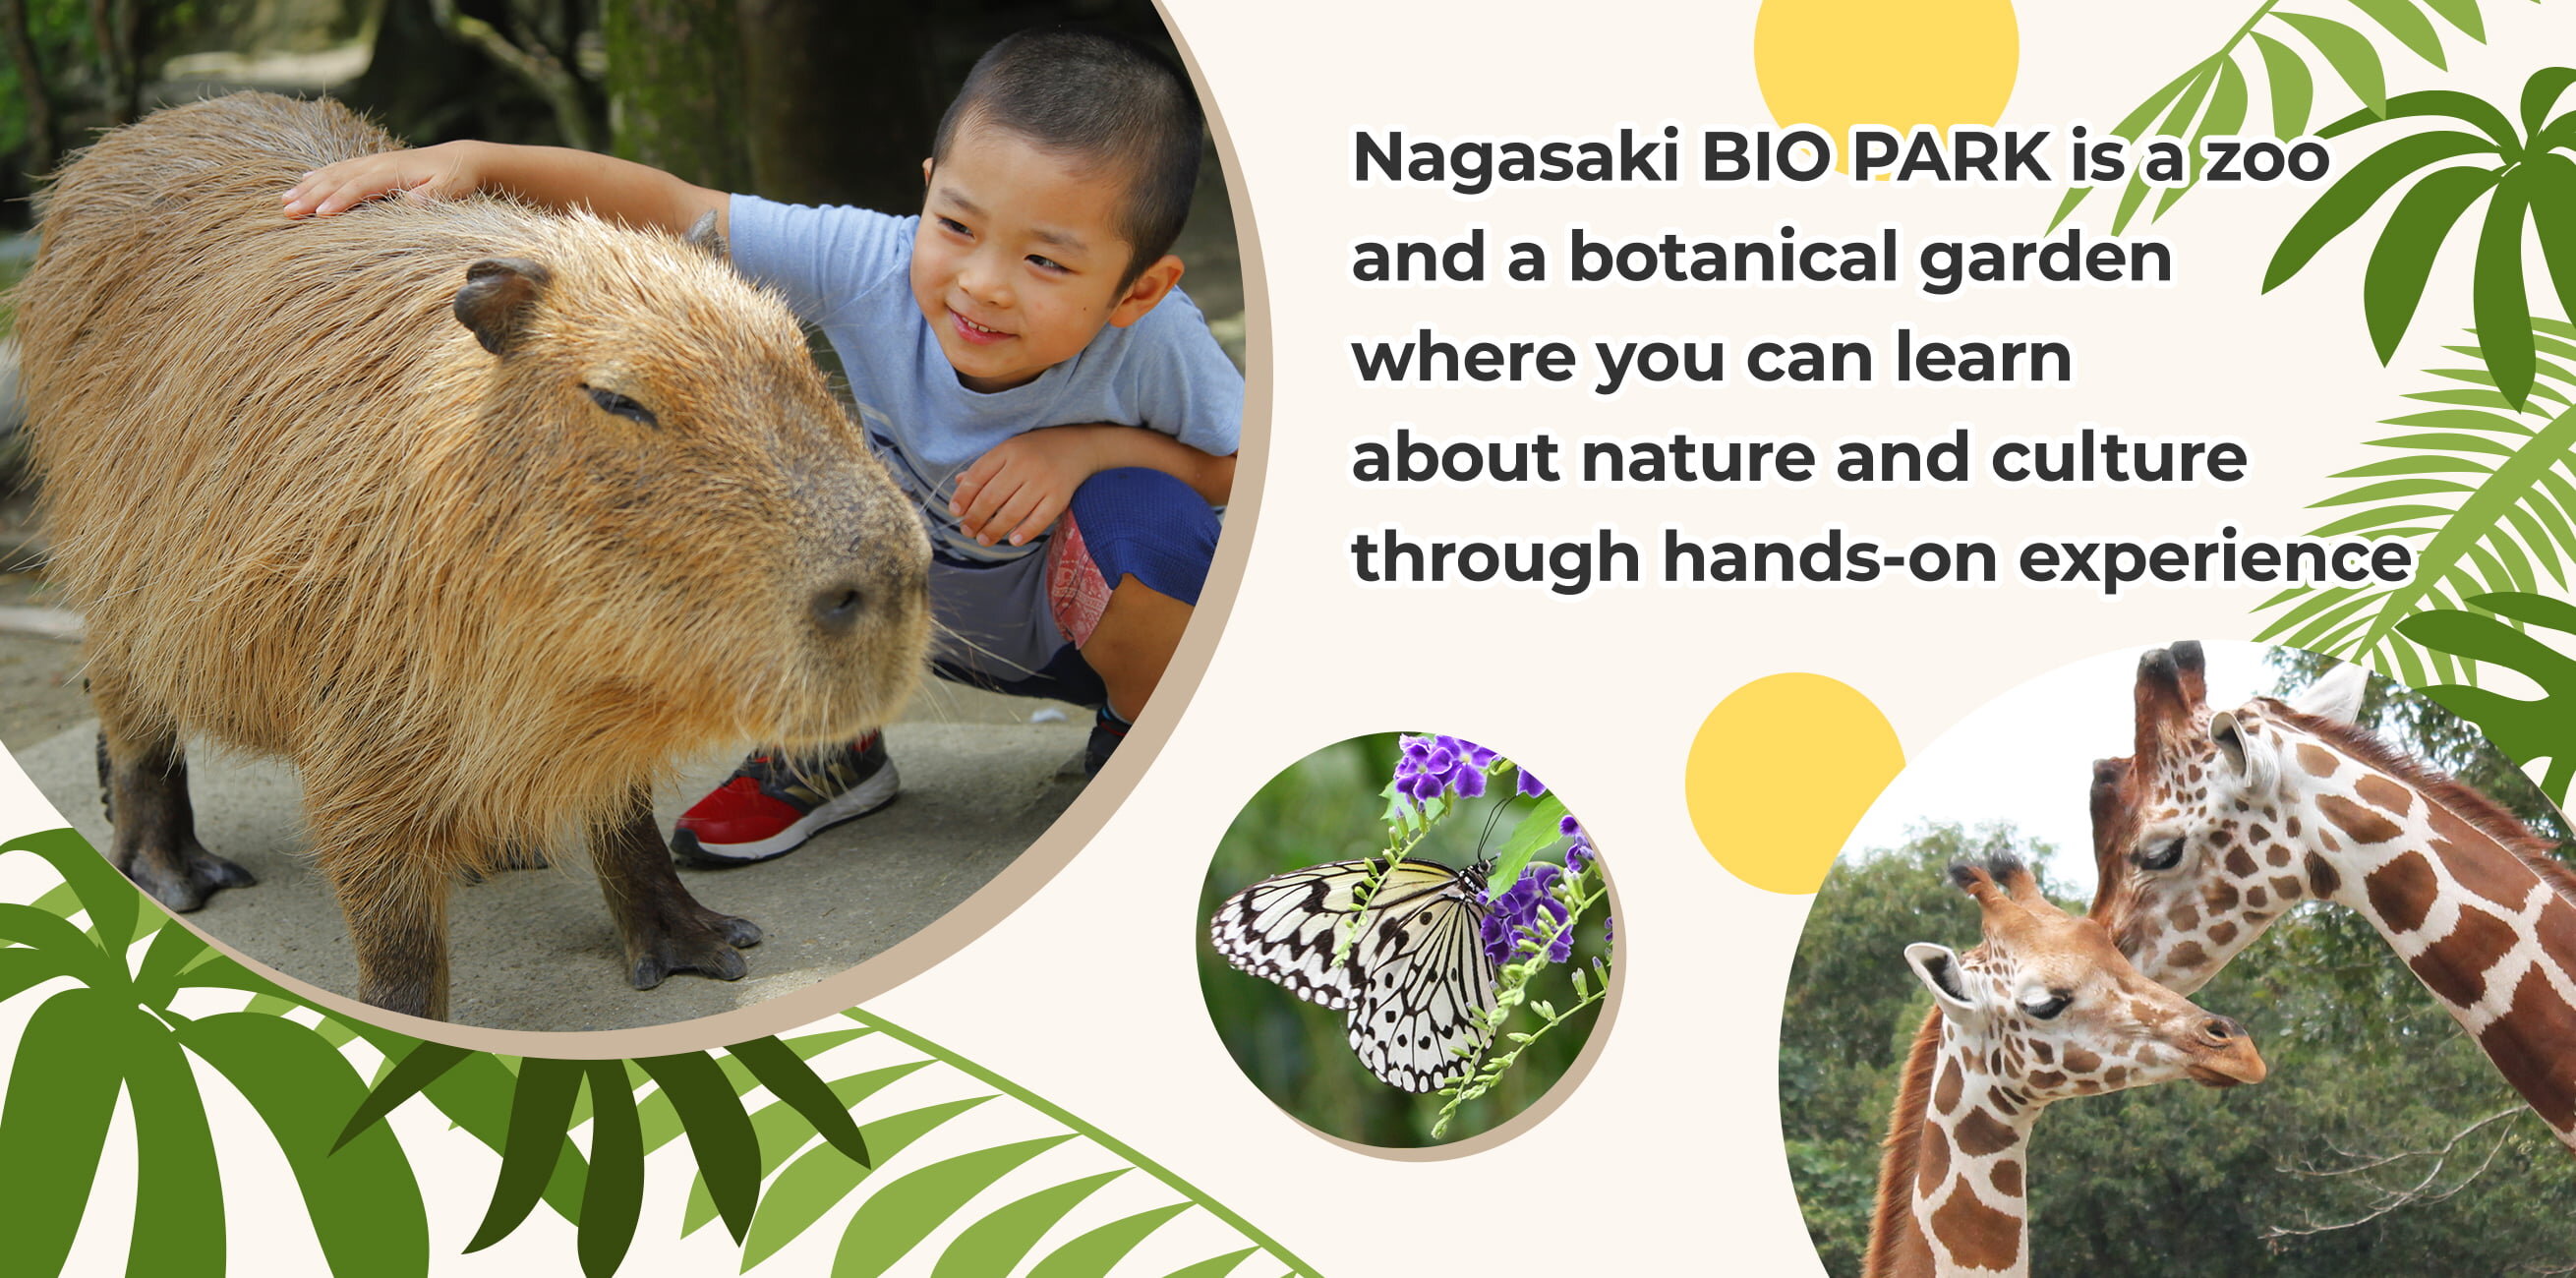 Nagasaki BIO PARK is a zoo and a botanical garden where you can learn about nature and culture through hands-on experience